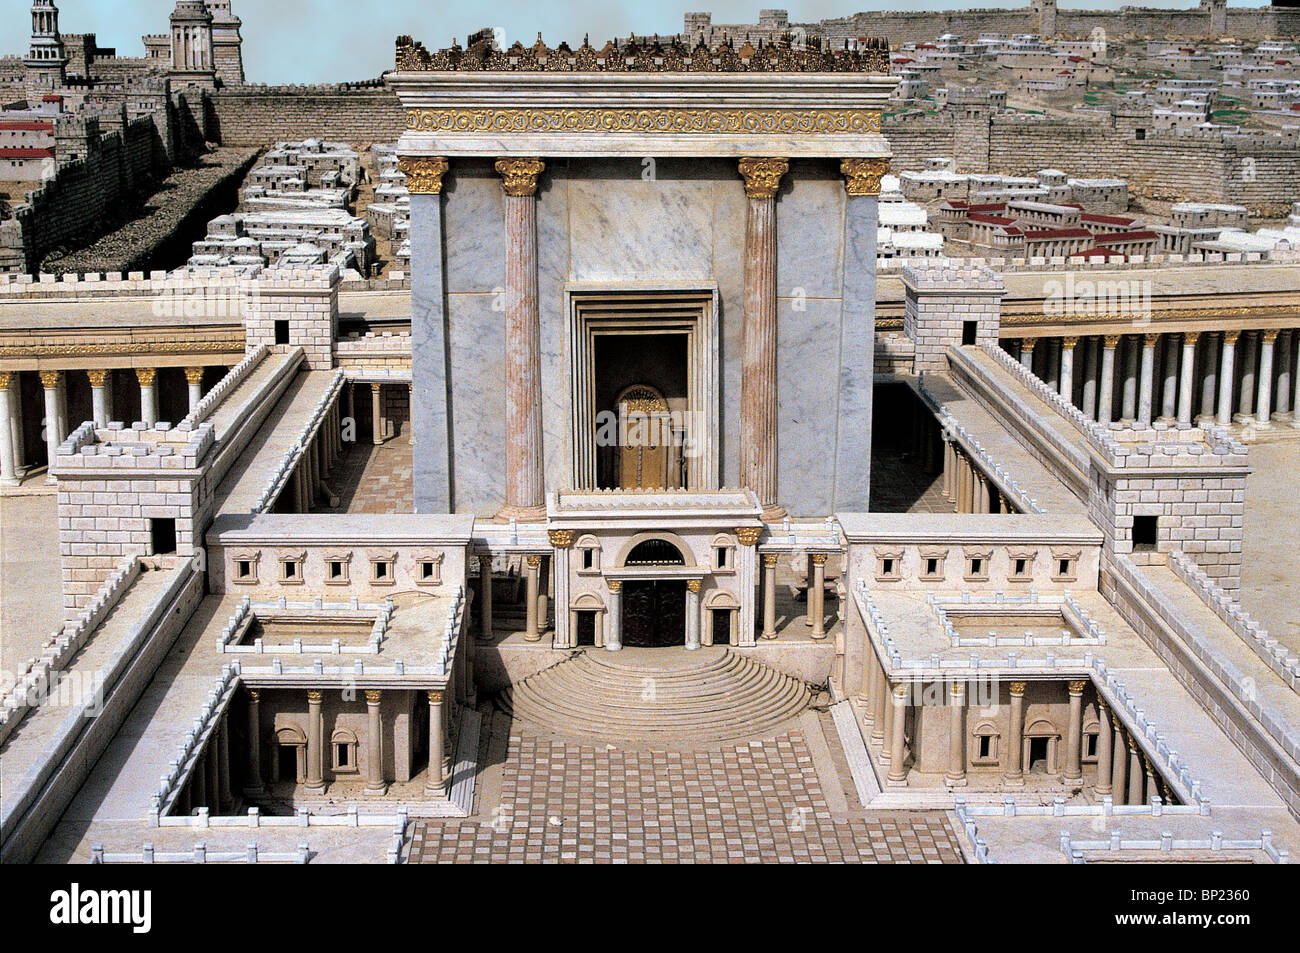 MODEL OF HEROD'S TEMPLE IN JERUSALEM. THE TEMPLE WAS A 50 M HIGH MARBLE BUILDING BUILT ON THE HIGHEST HILL IN JERUSALEM Stock Photo